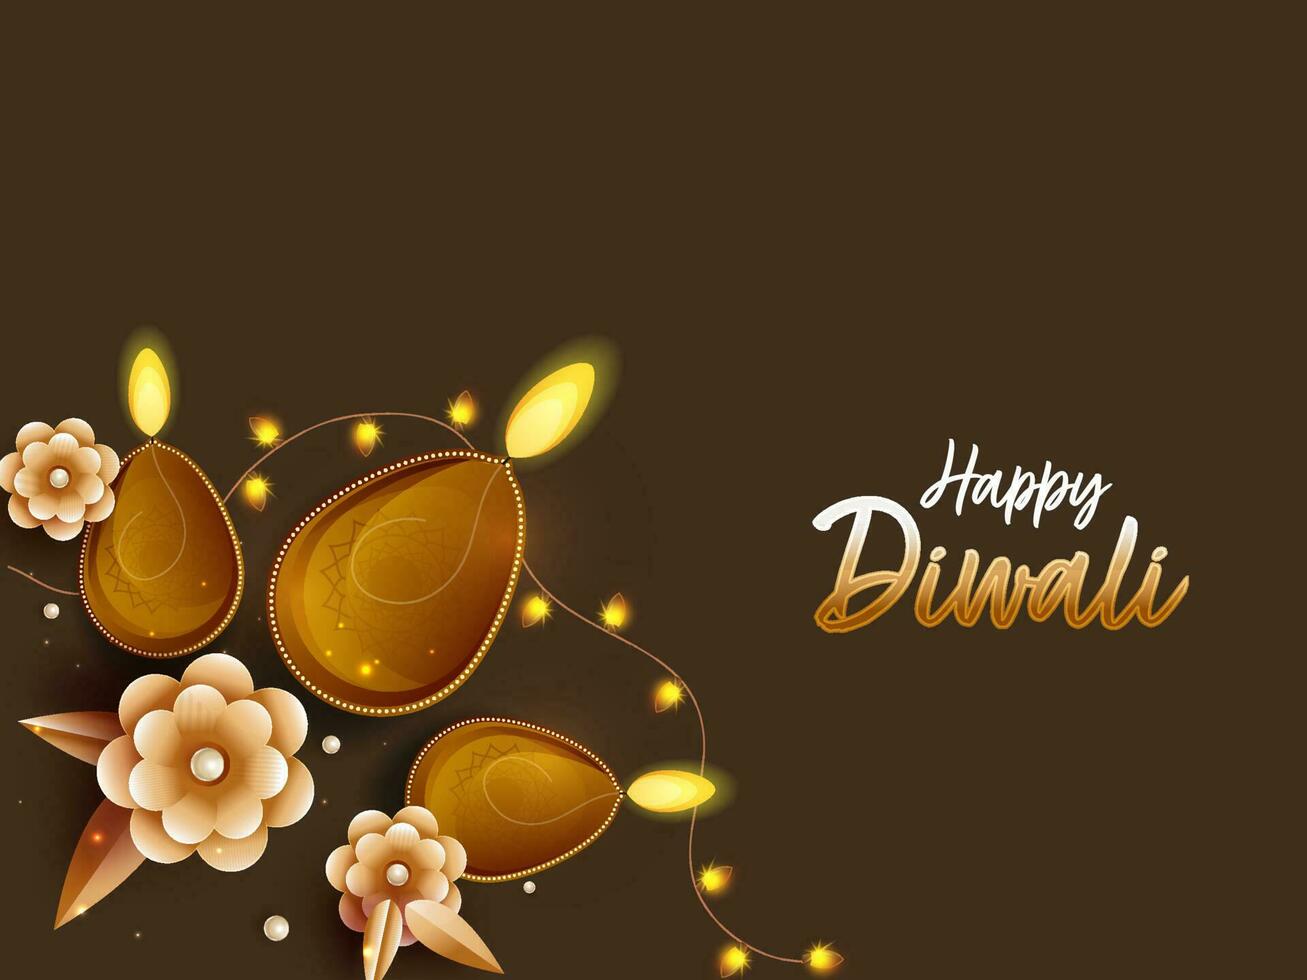 Indian Light Festival, Happy Diwali with Illuminated Oil Lit Lamps, Paper Flowers and Decorating Lights on Brown Background with Space for Your Message. vector